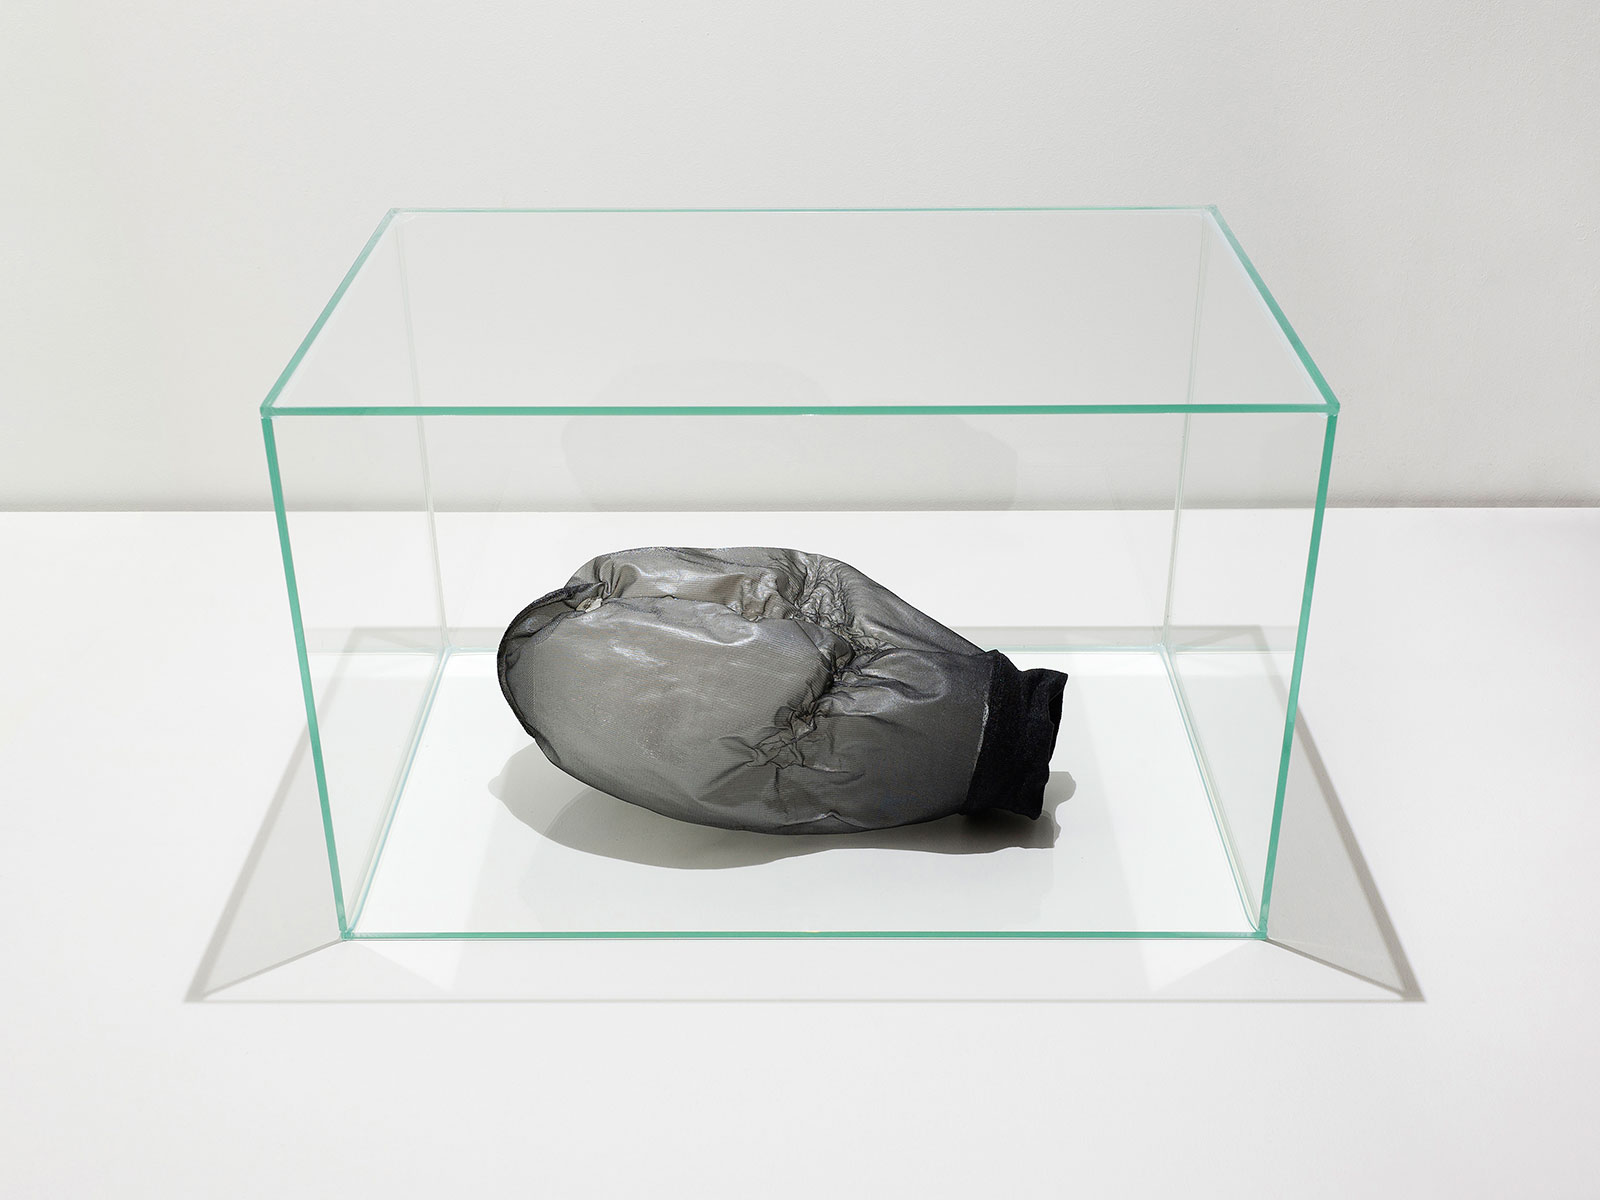 Black polyamide stocking with collapsed balloon and epoxy resin placed in a glass cube